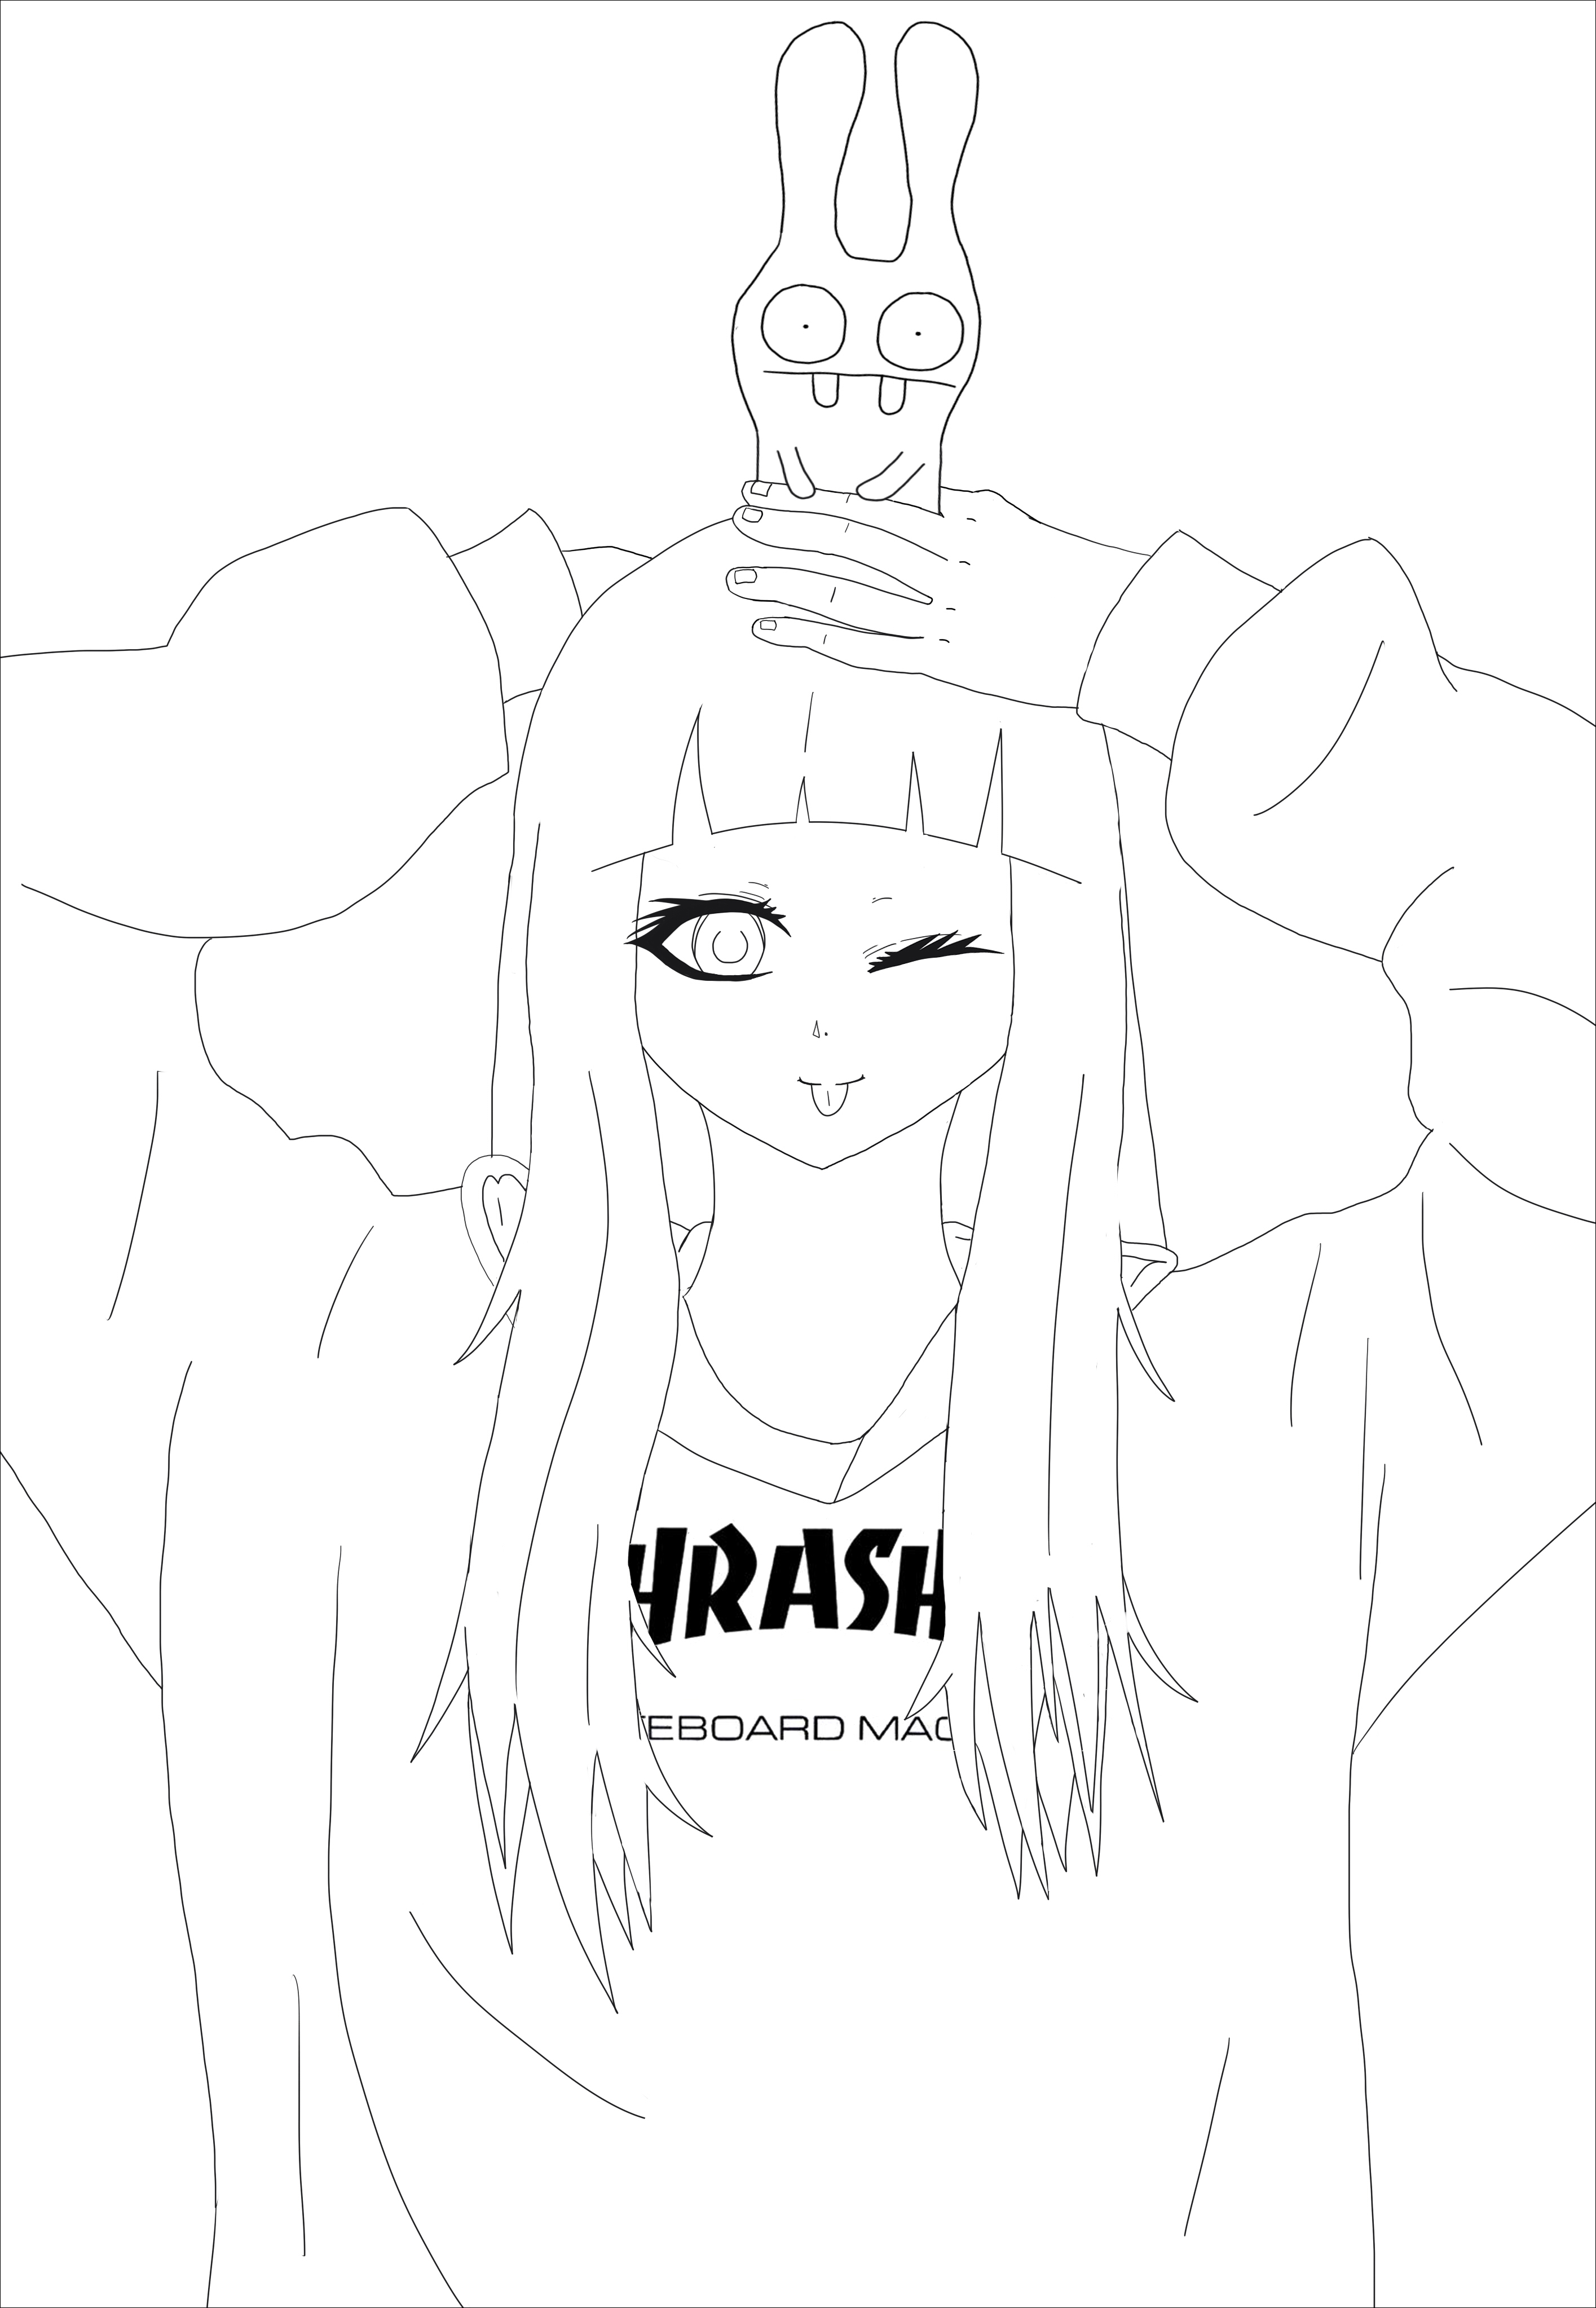 Coloring page adult thrasher girl